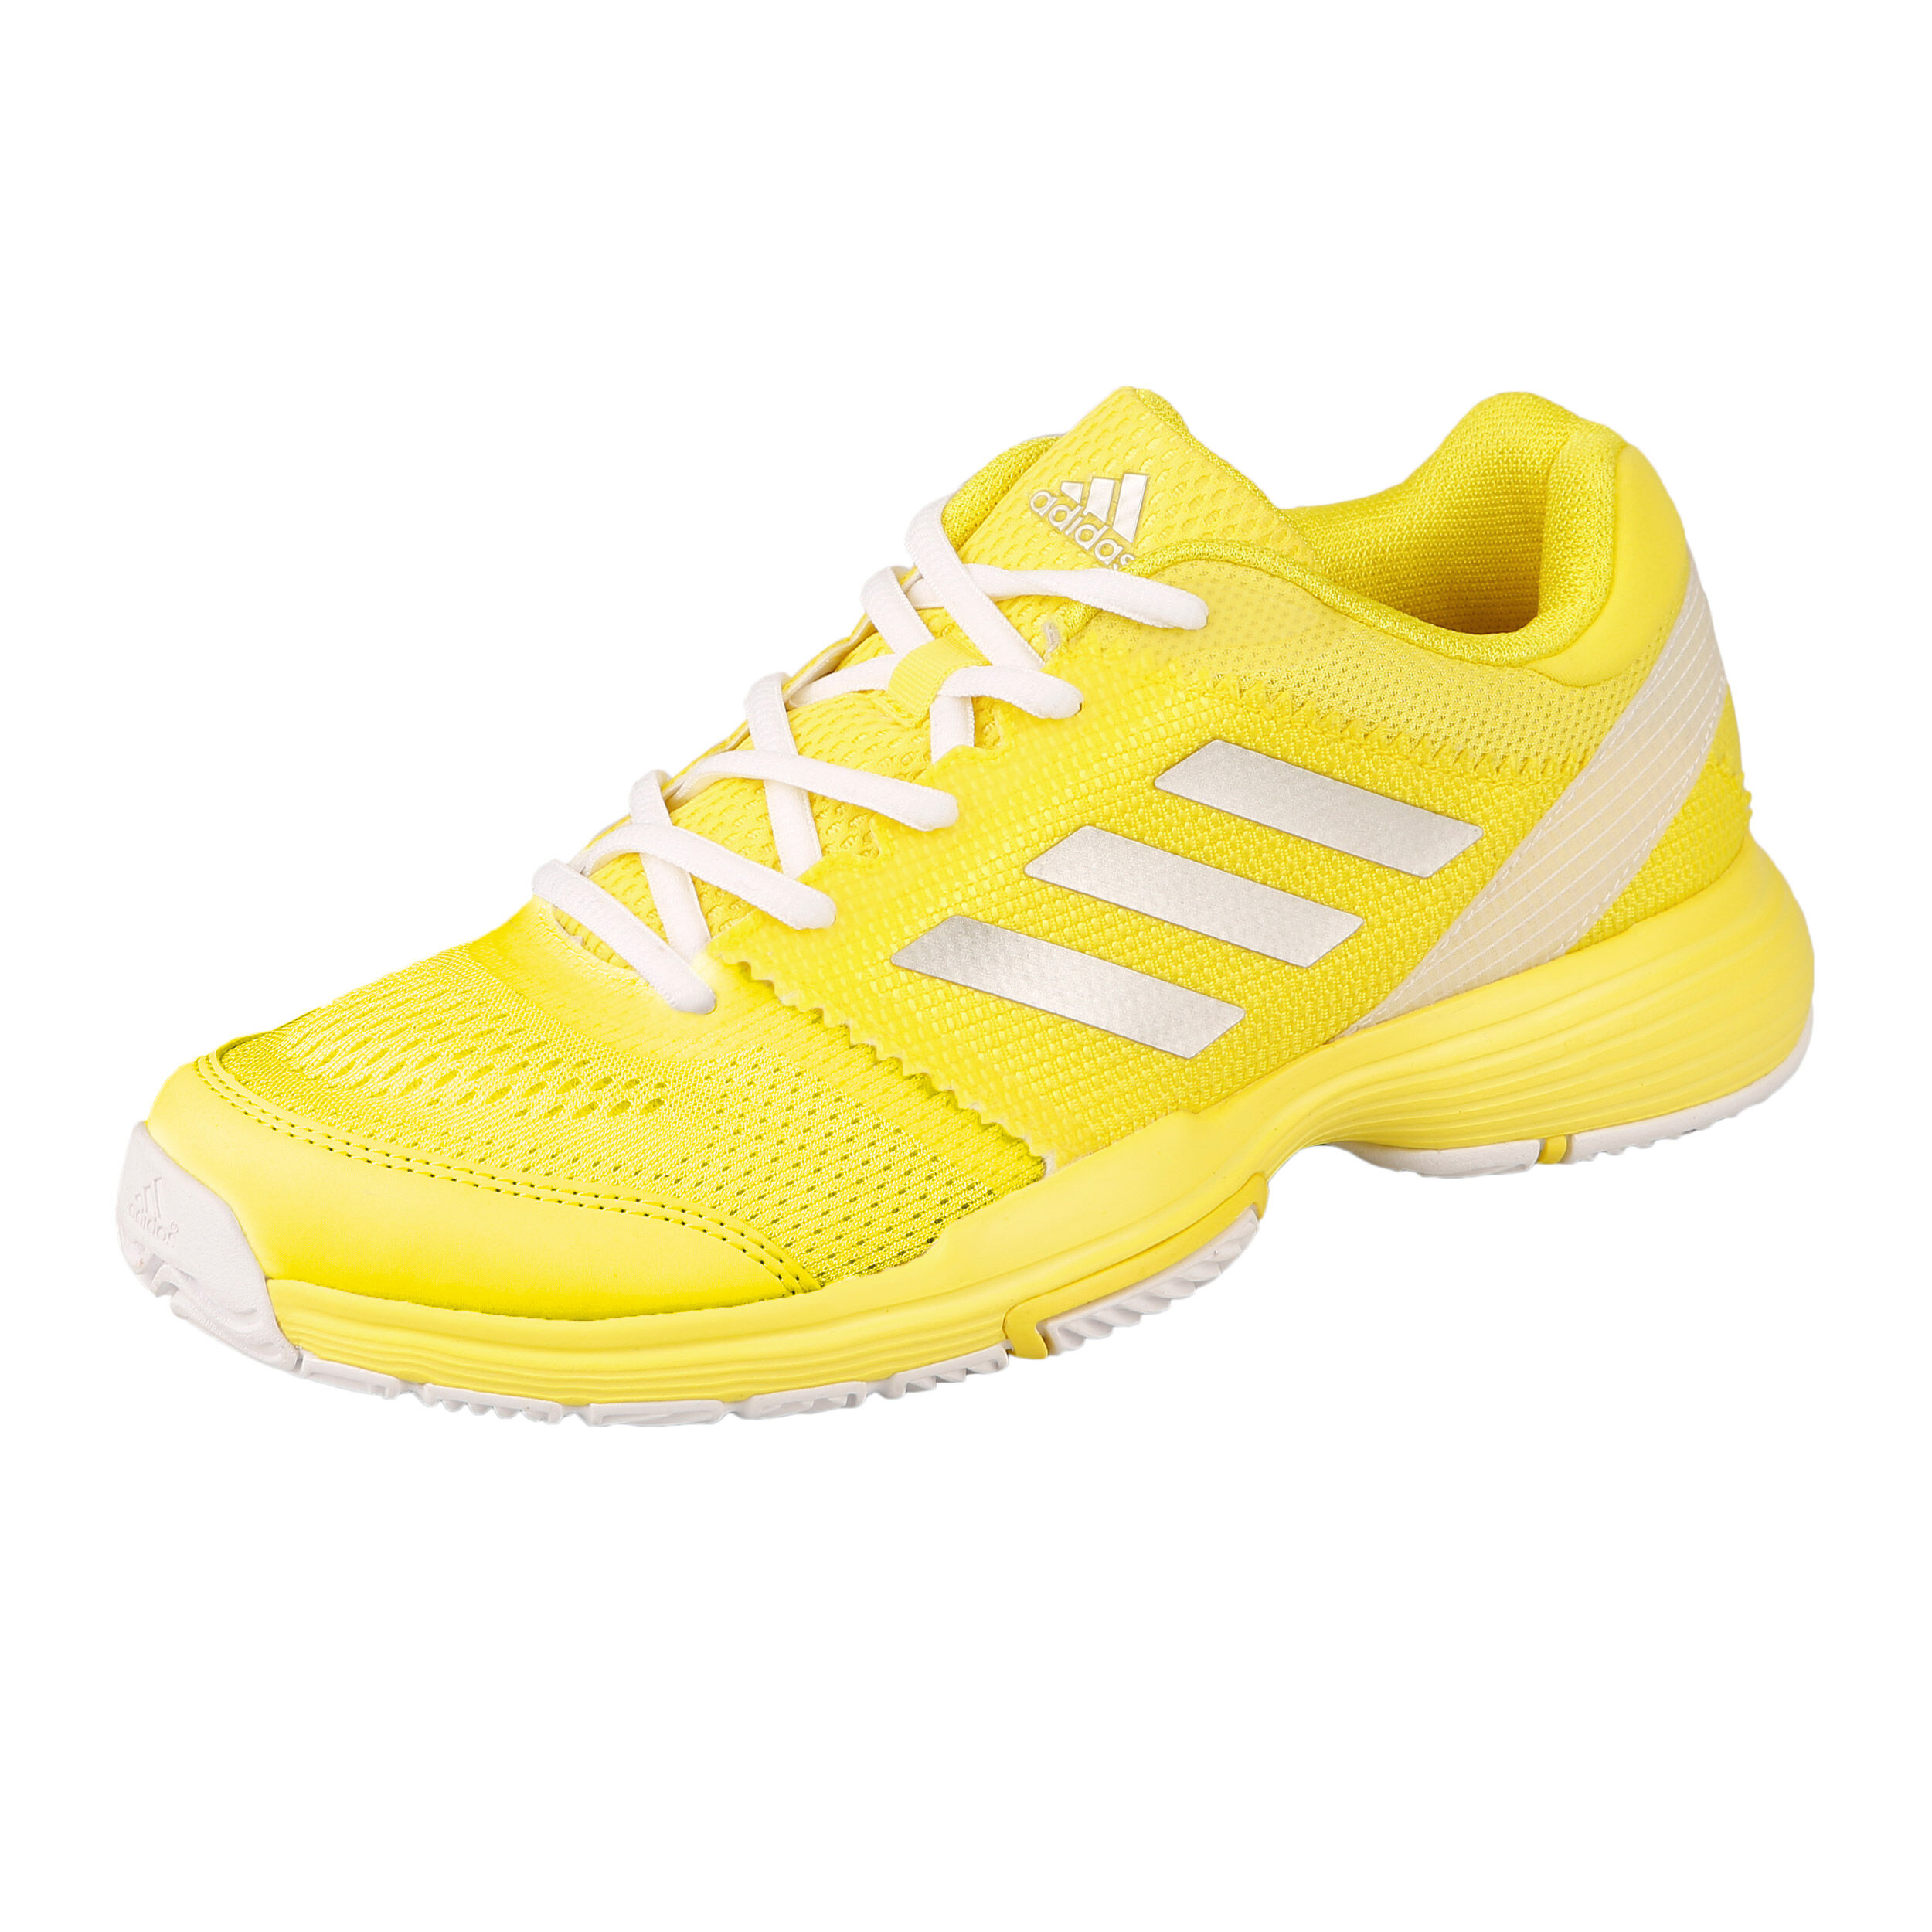 yellow tennis shoes